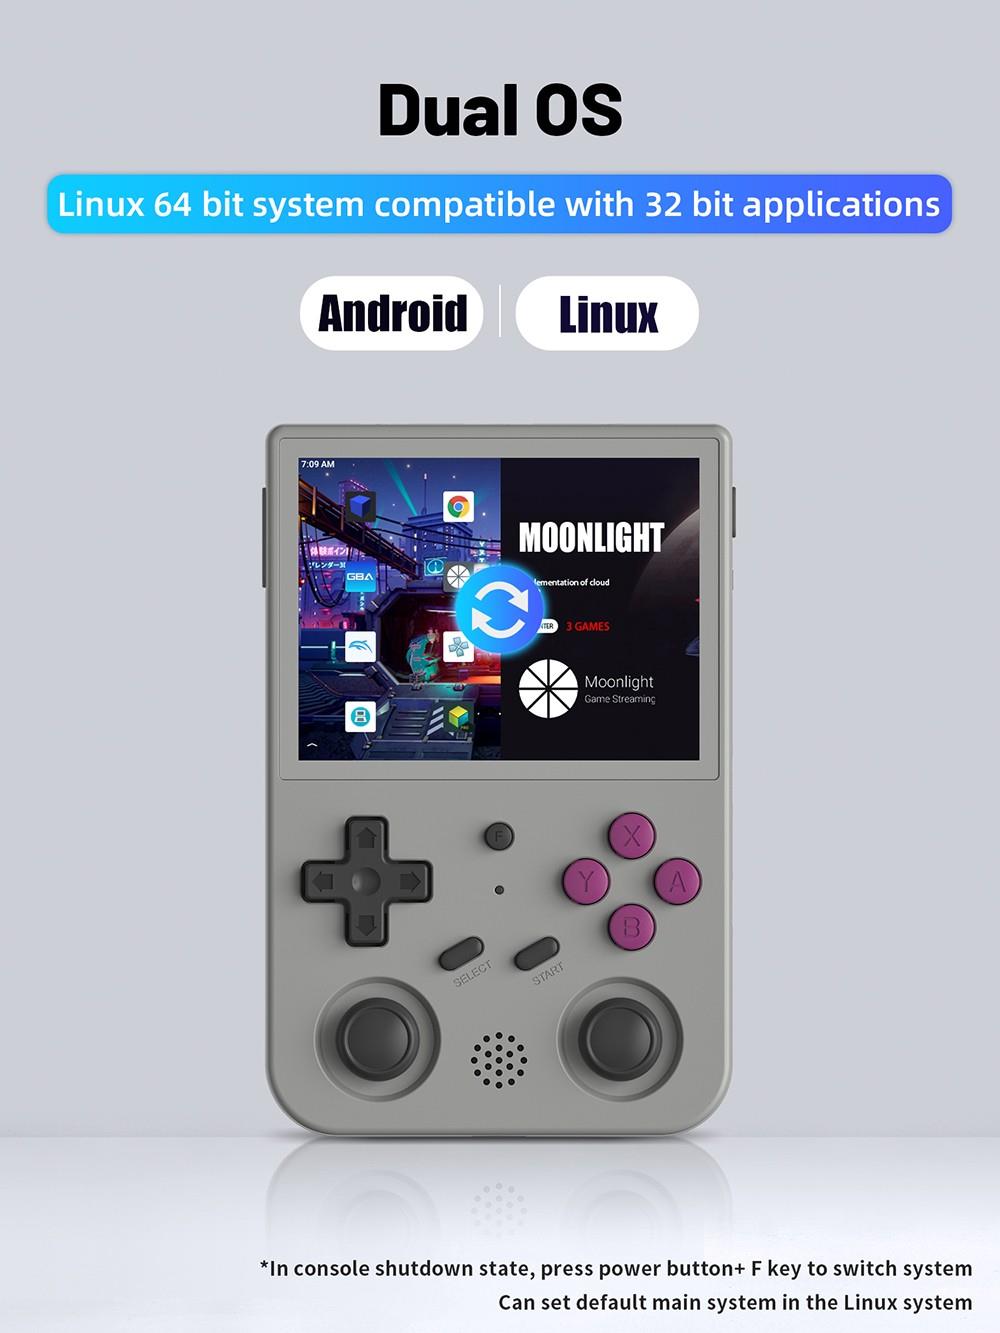 ANBERNIC RG353VS Portable Game Console Android 16GB Linux+128GB Game TF Card 3.5'' IPS Retro WiFi Bluetooth - Grey